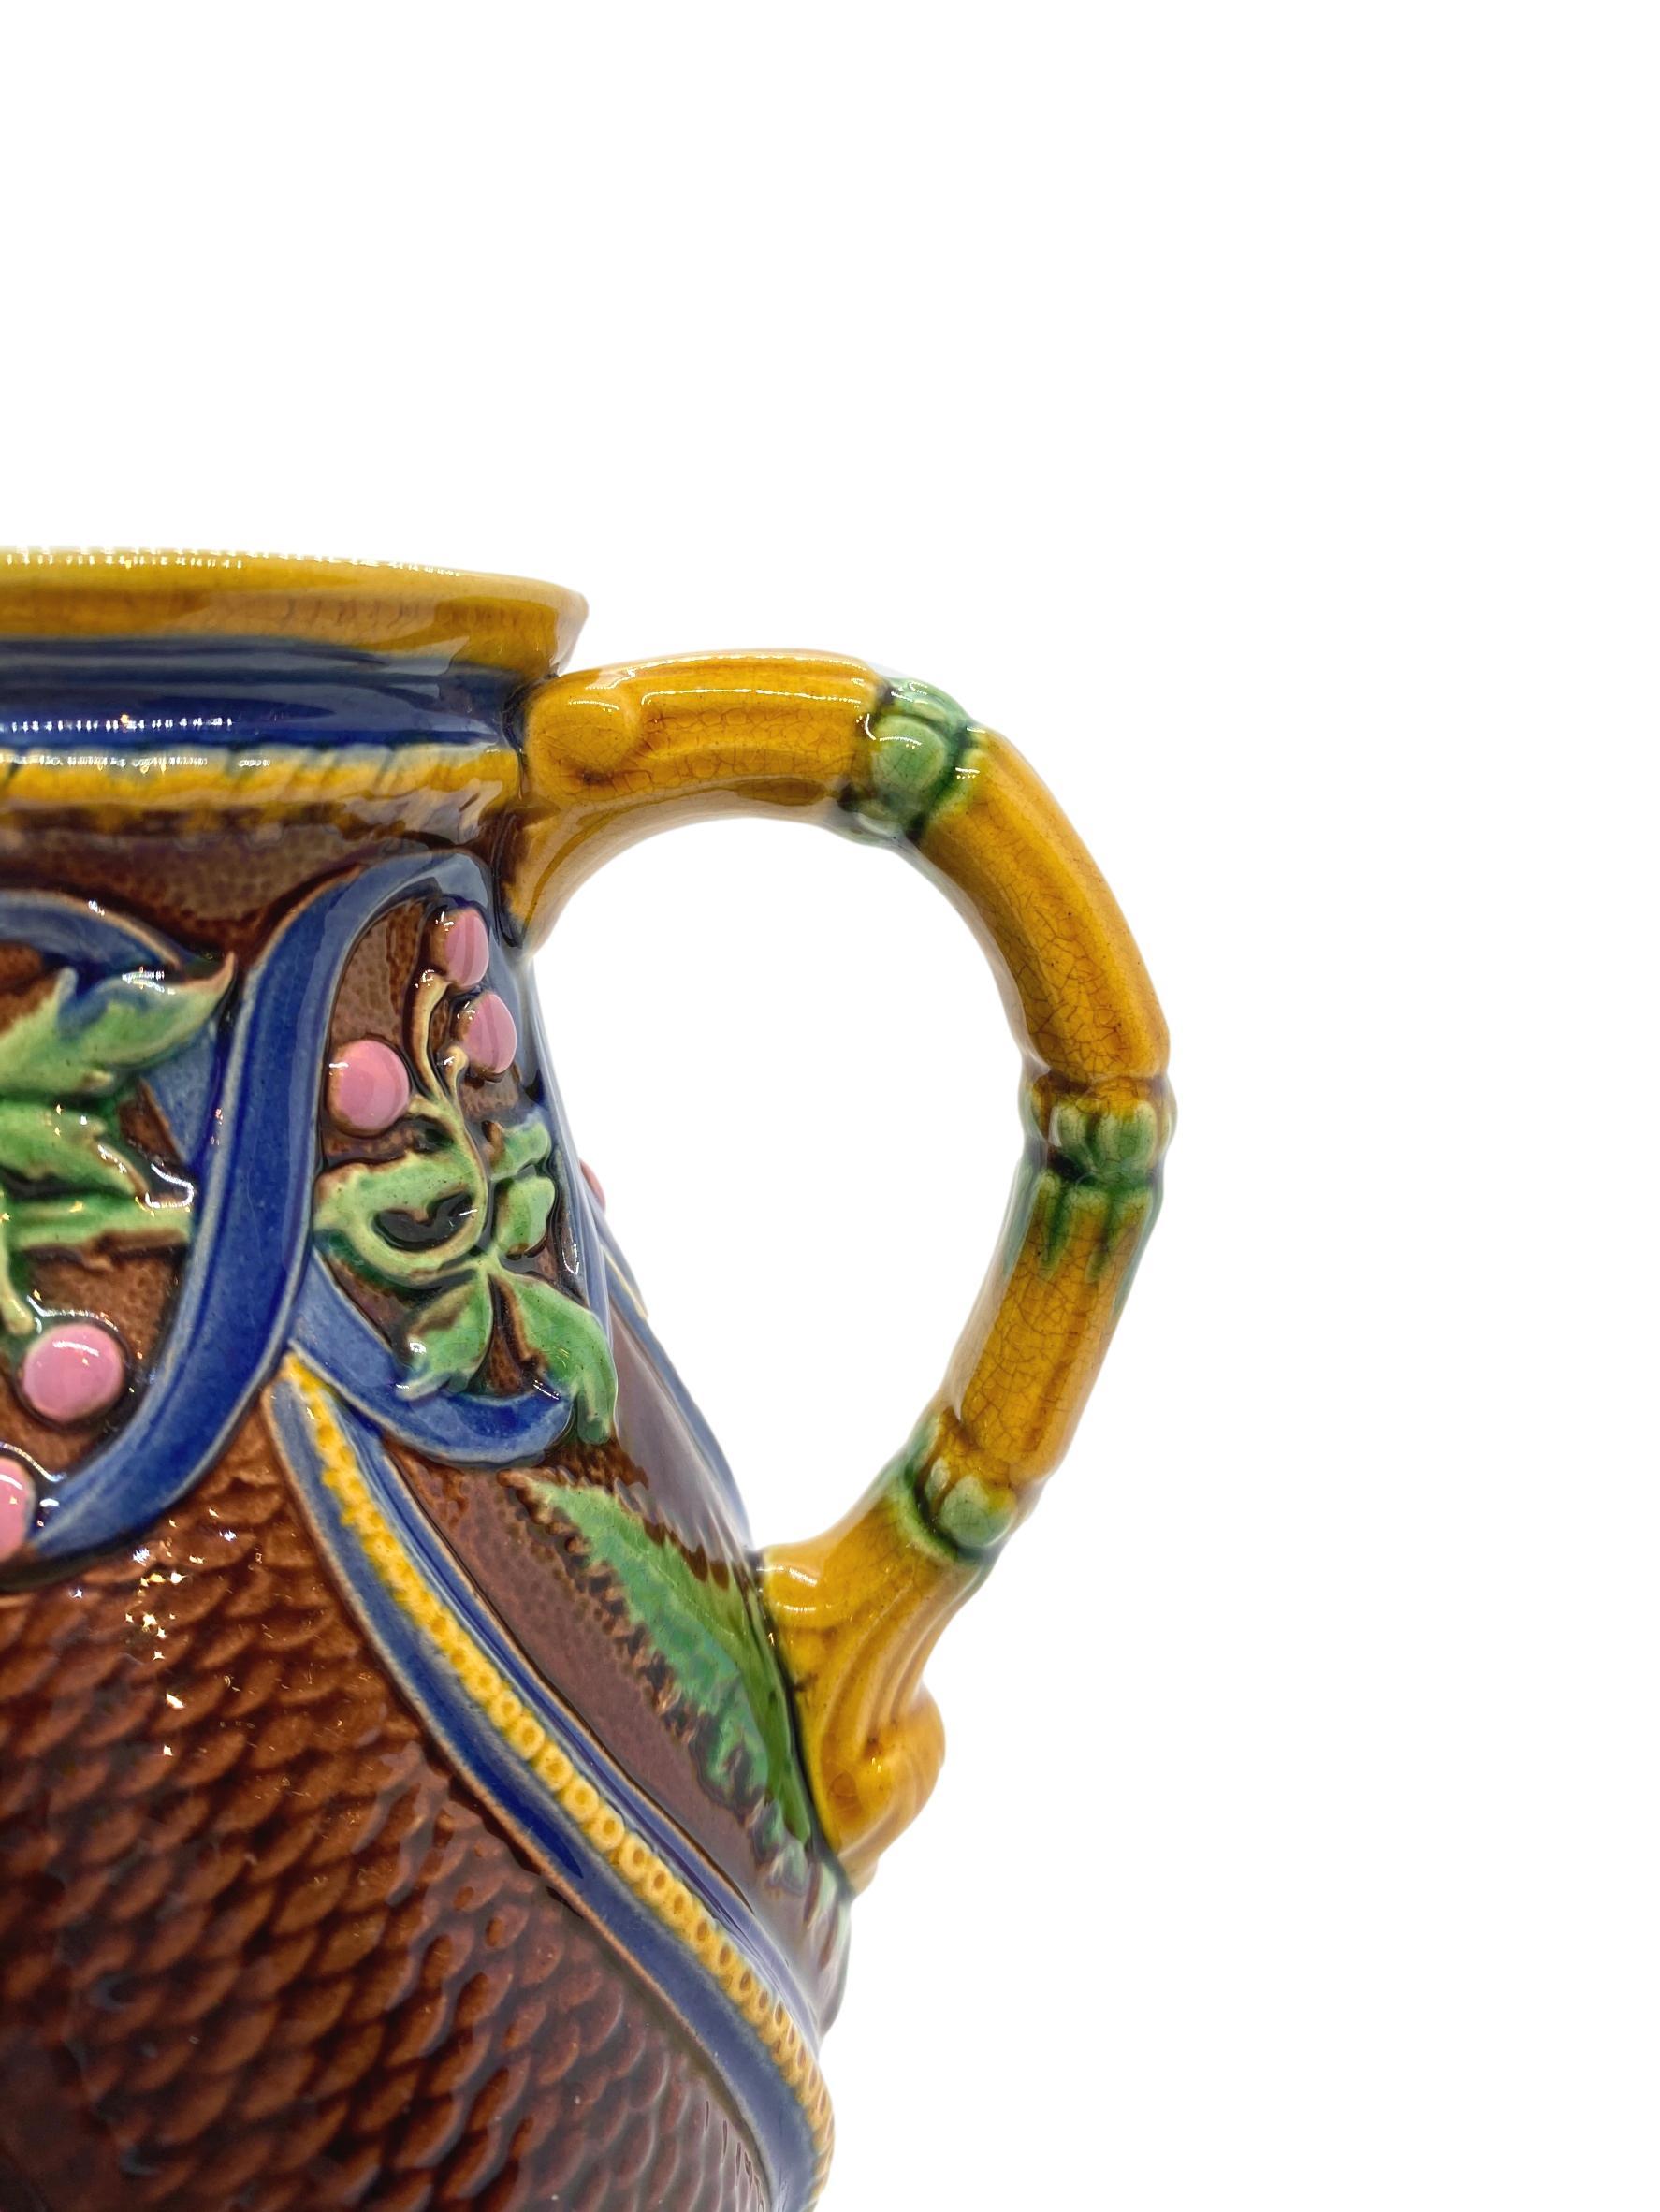 19th Century Minton Majolica Pitcher with Ferns and Pink Berries, English, Dated 1860